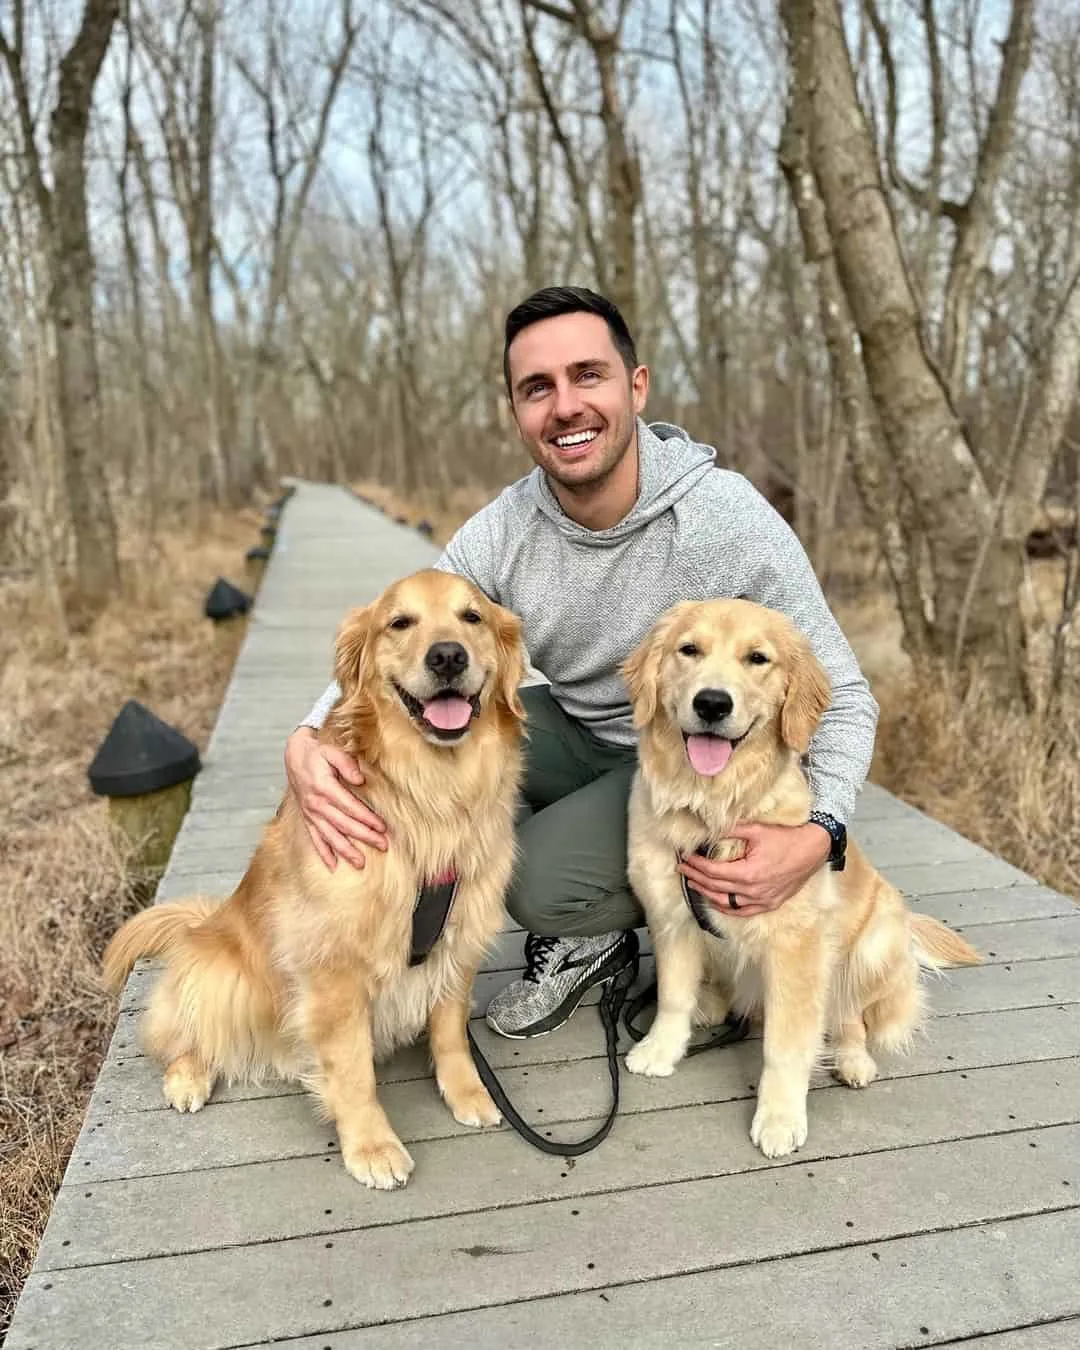 Photo of a man spending time with his dogs